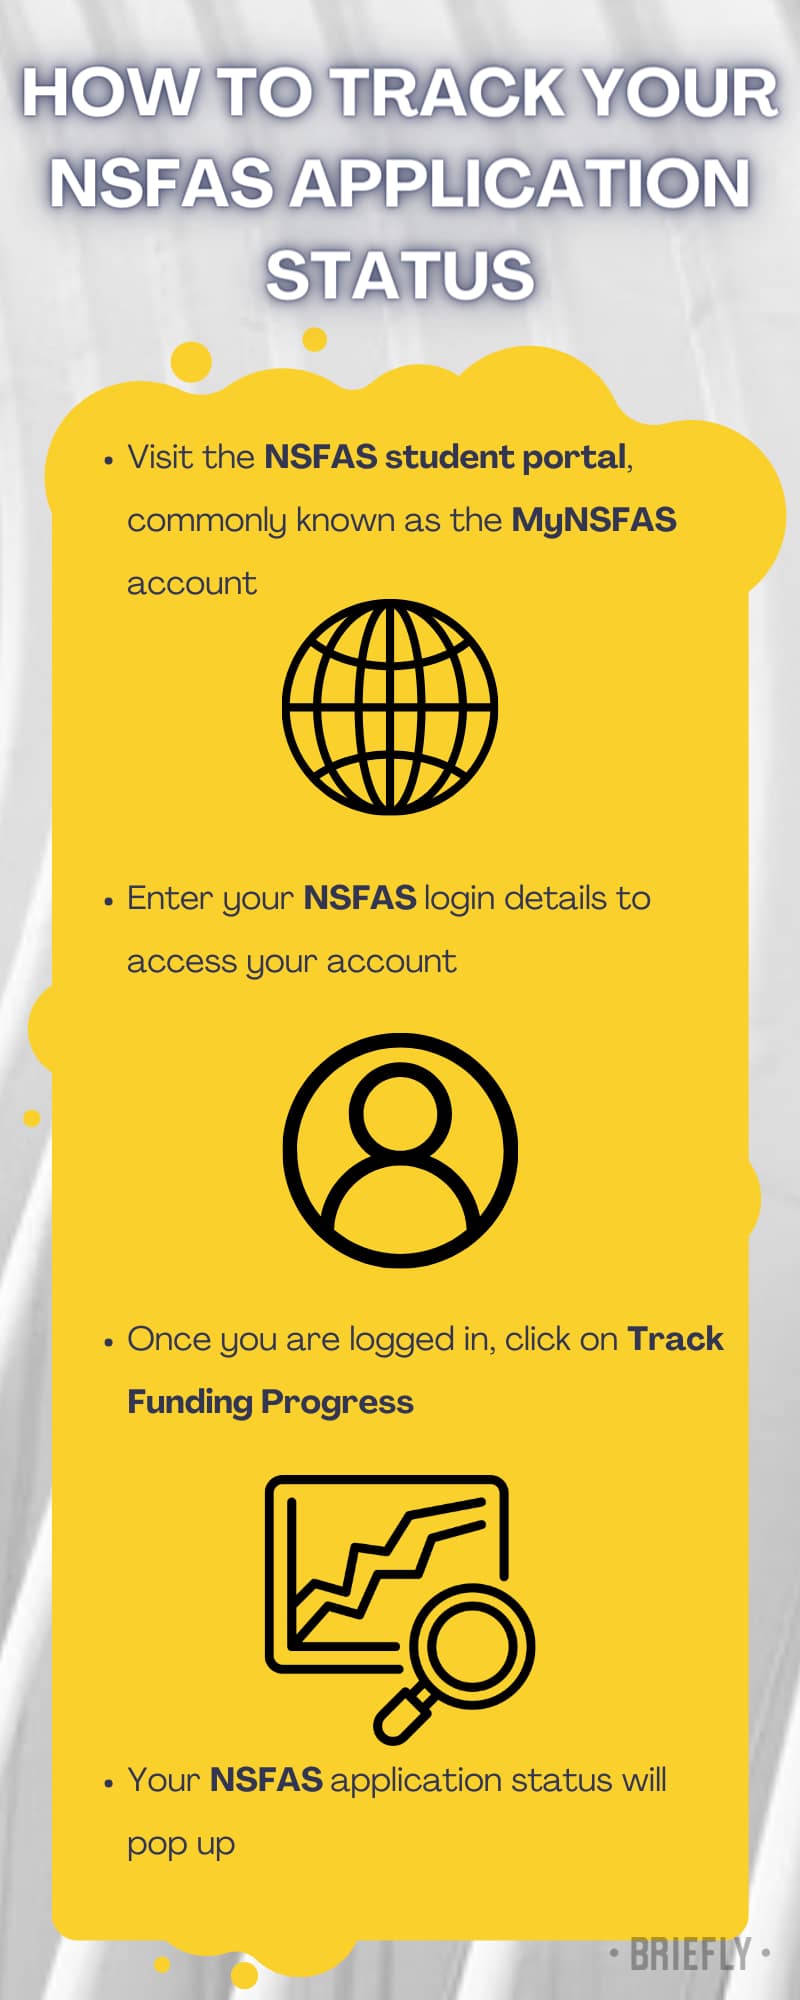 How to check your NSFAS application status